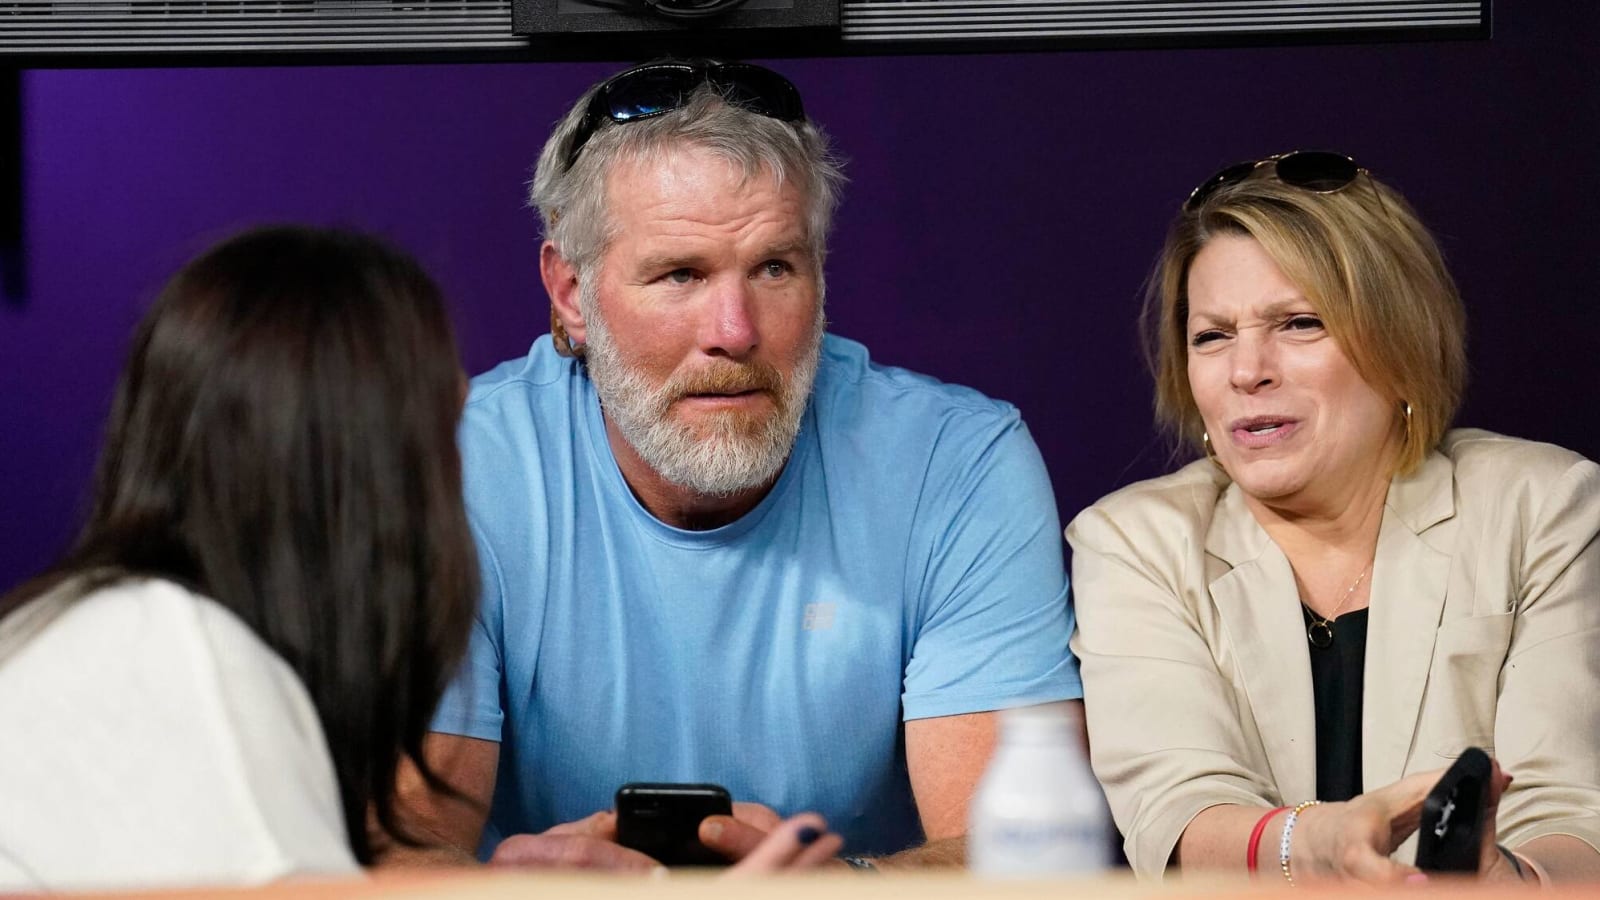 Texts paint bad picture for Brett Favre in welfare funds scandal